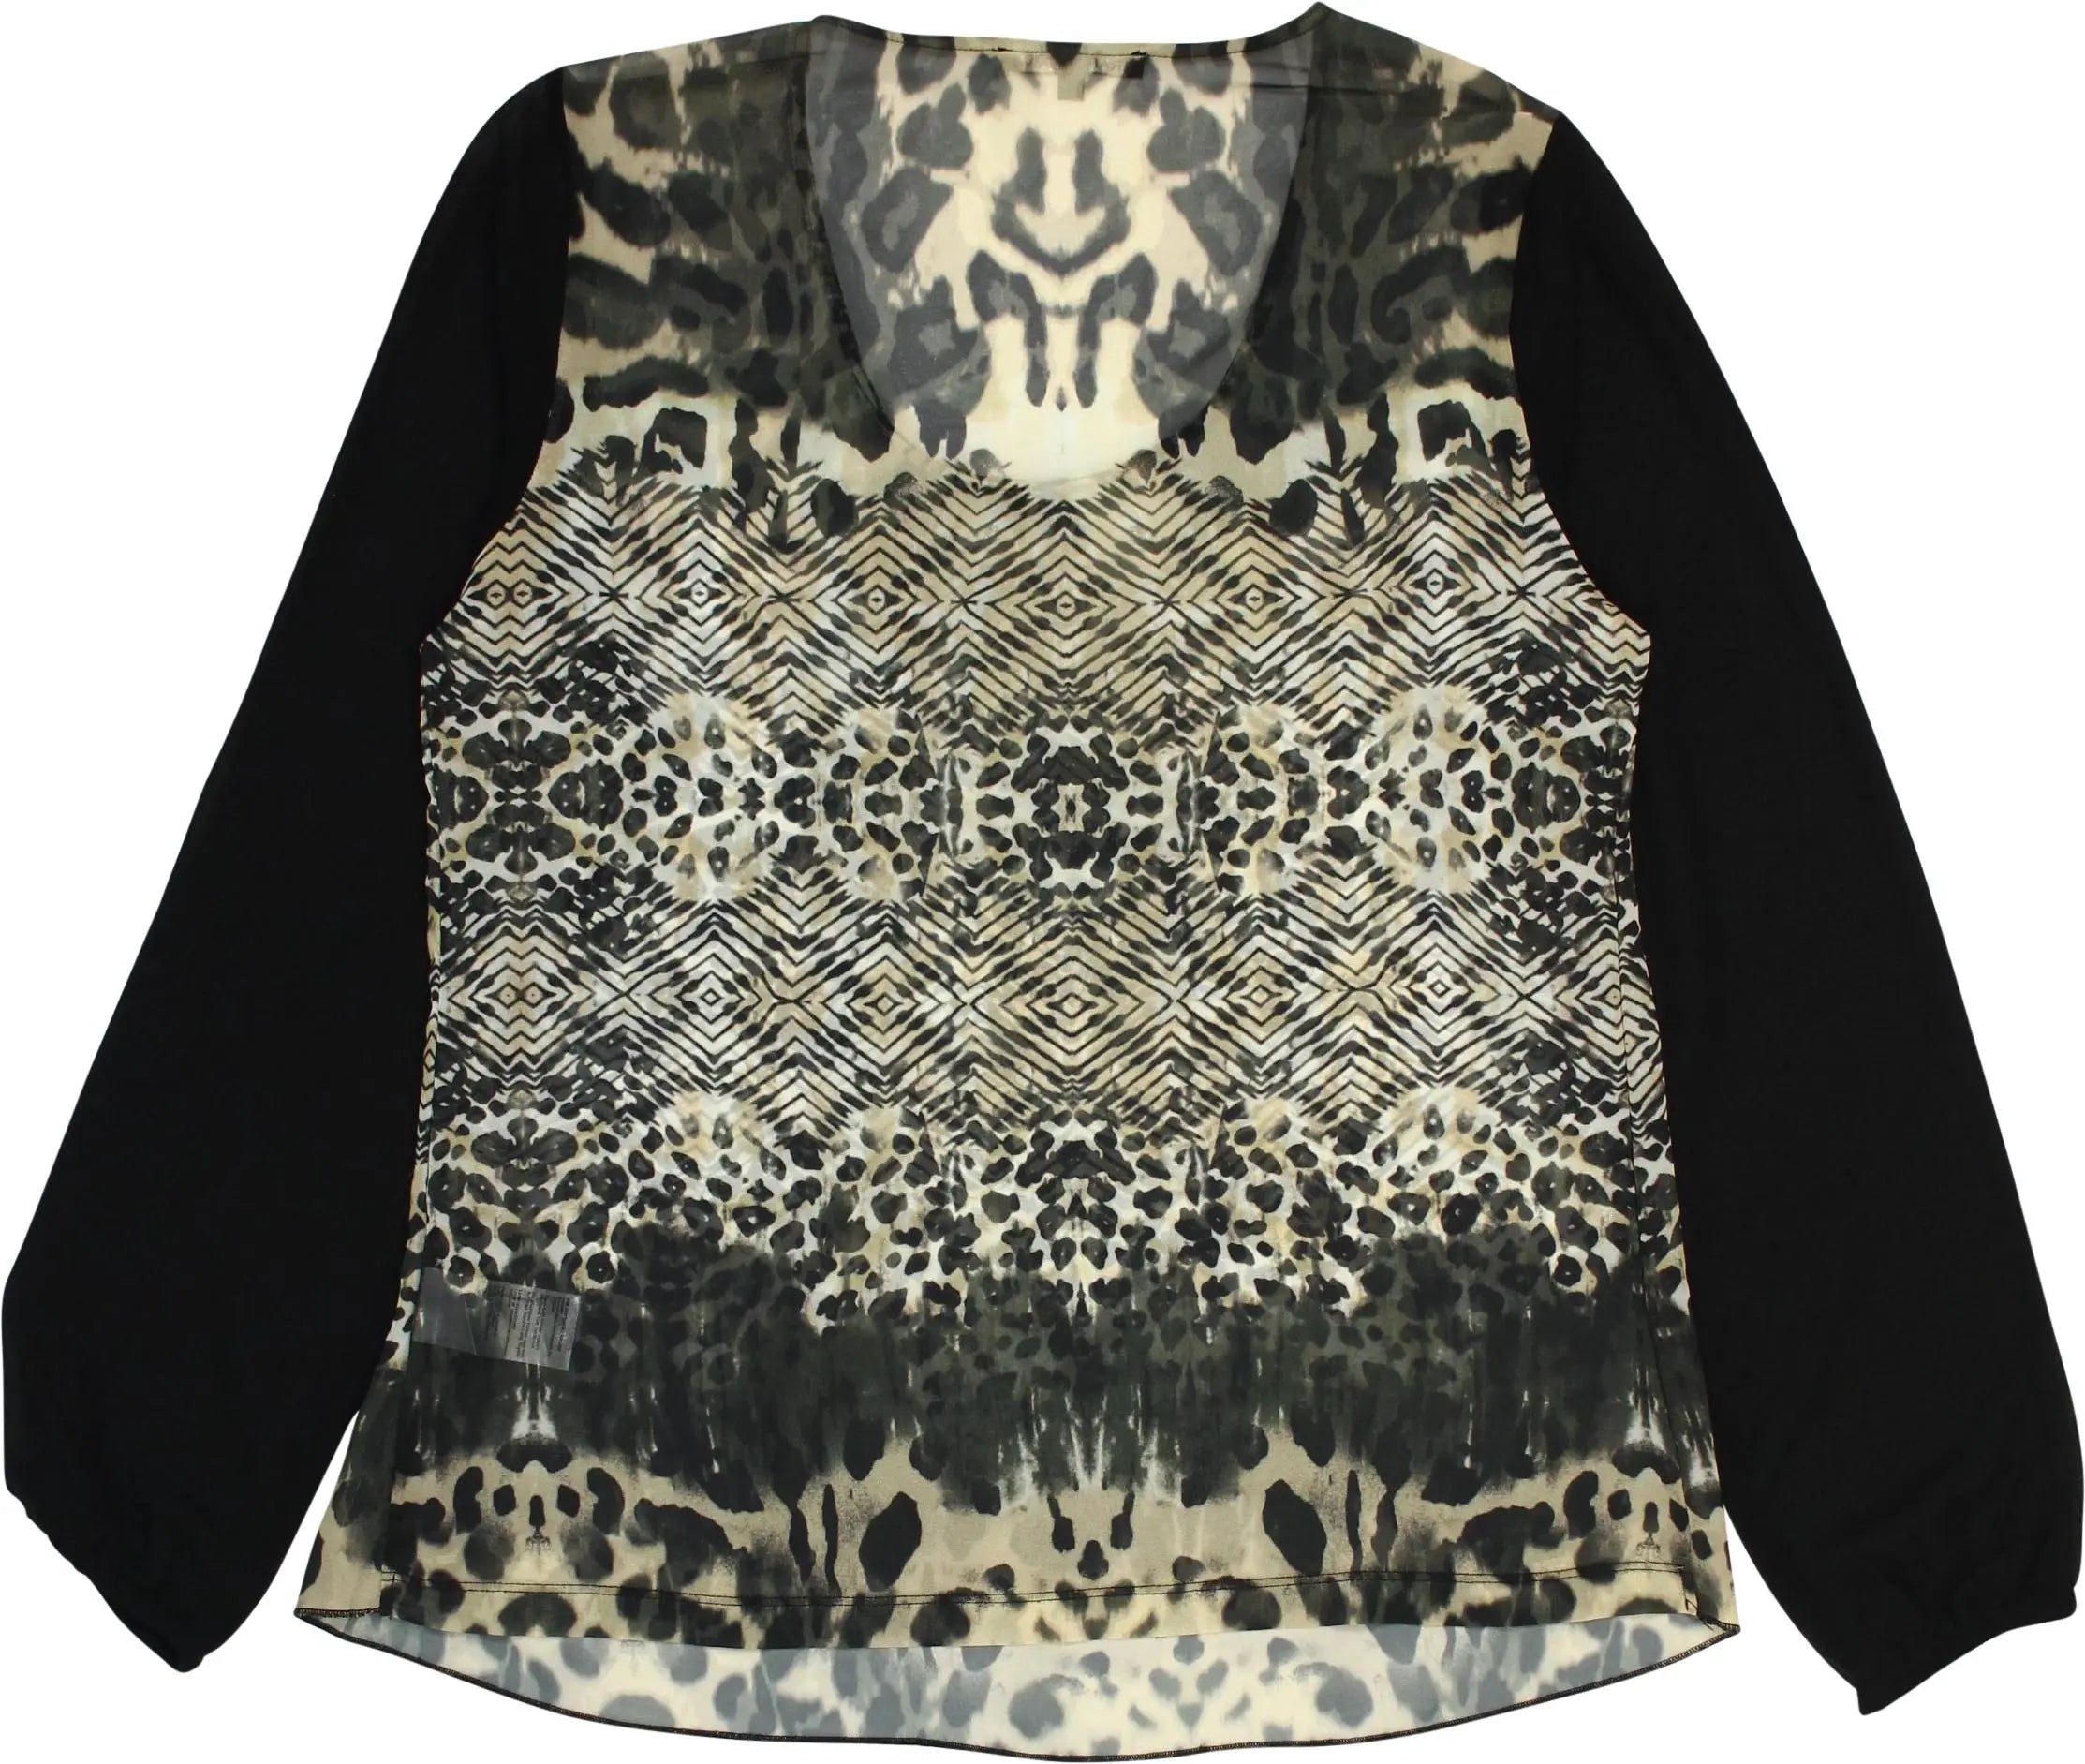 Tramontana - Long Sleeve Sheer Animal Print Top- ThriftTale.com - Vintage and second handclothing